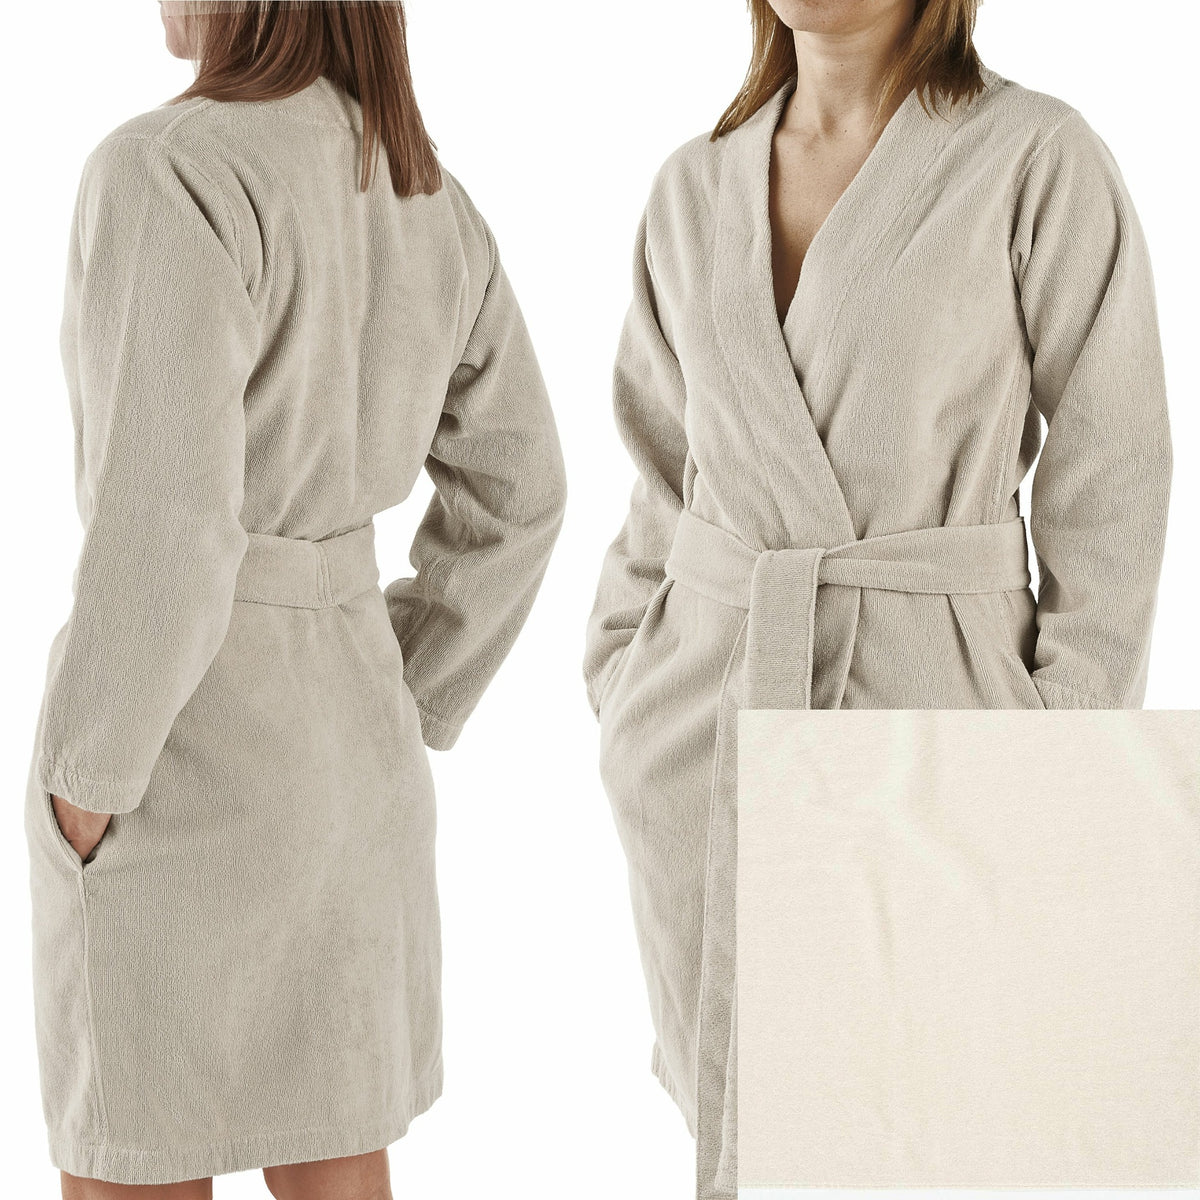 Abyss Spa Bath Robes and Slippers with Swatch Ecru Fine Linens